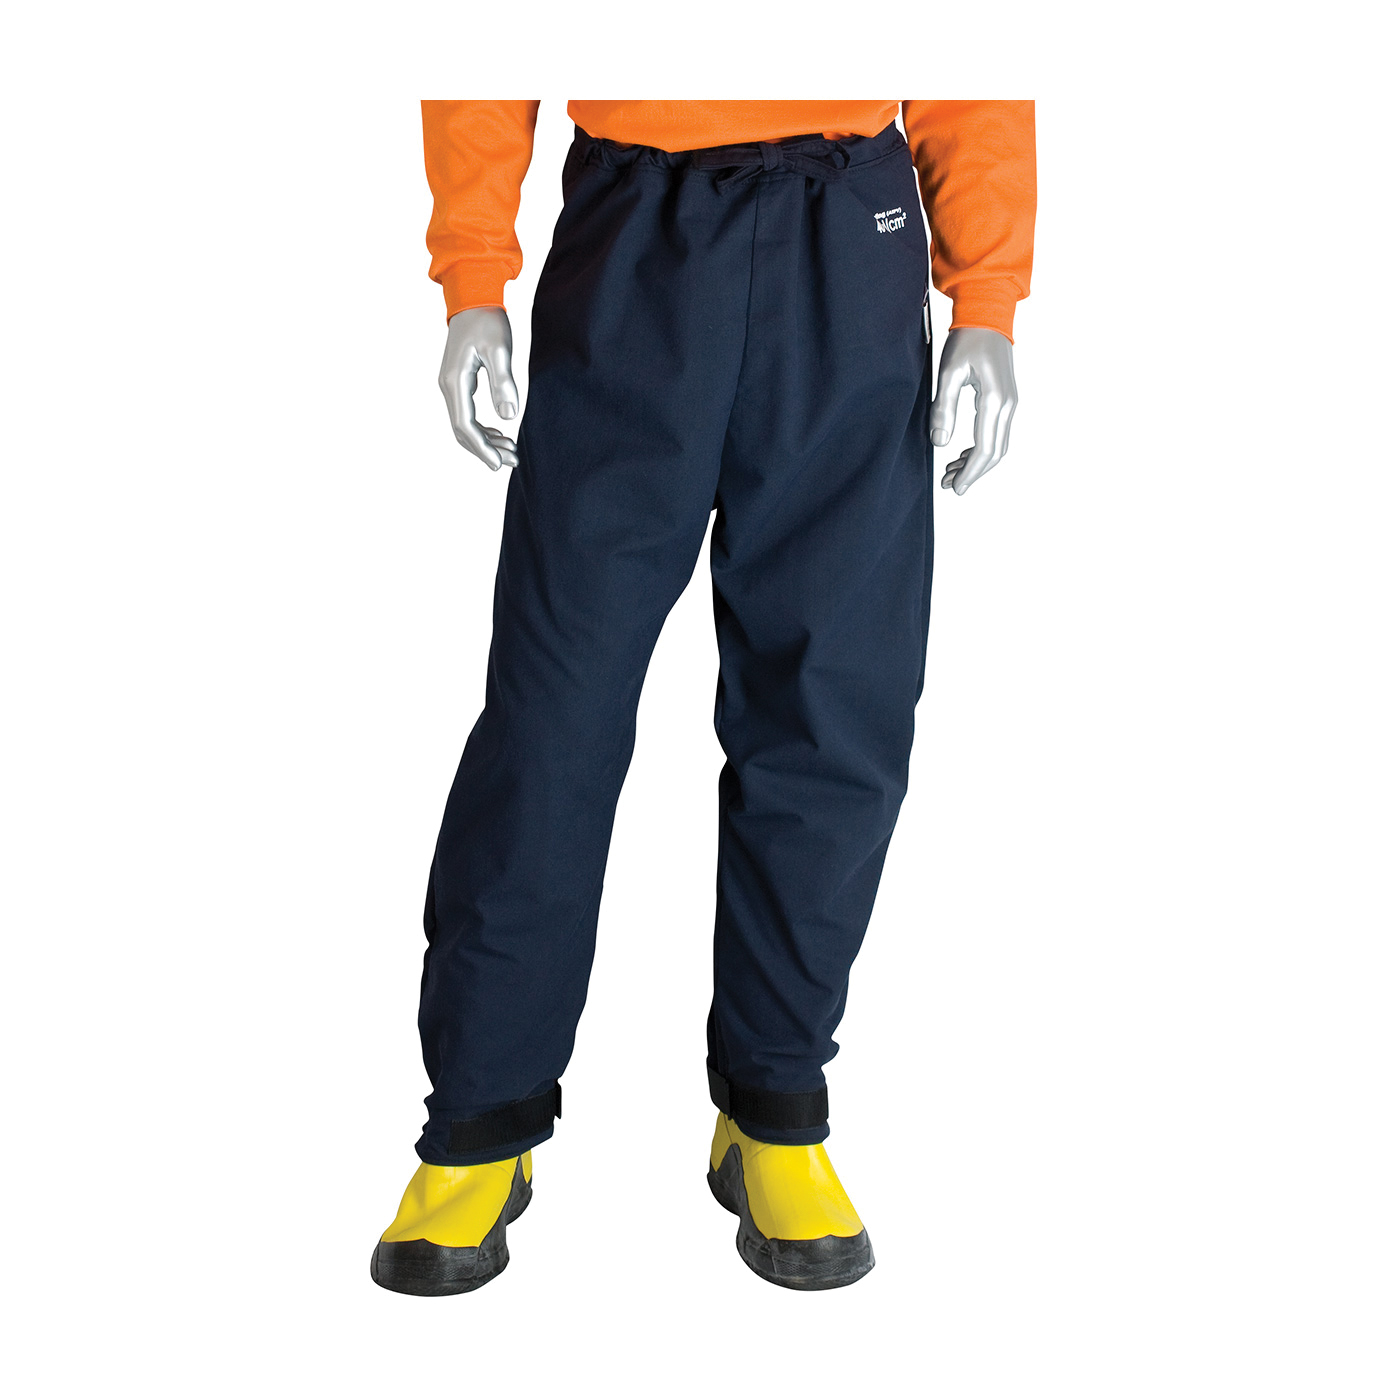 PIP® 9100-530ULT/3X 9100-530ULT Ultralight Flame Resistant Pant, 52 to 54 in Waist, 32 in L Inseam, Navy Blue, DuPont™ Protera®/Westex® UltraSoft® Interlock Knit